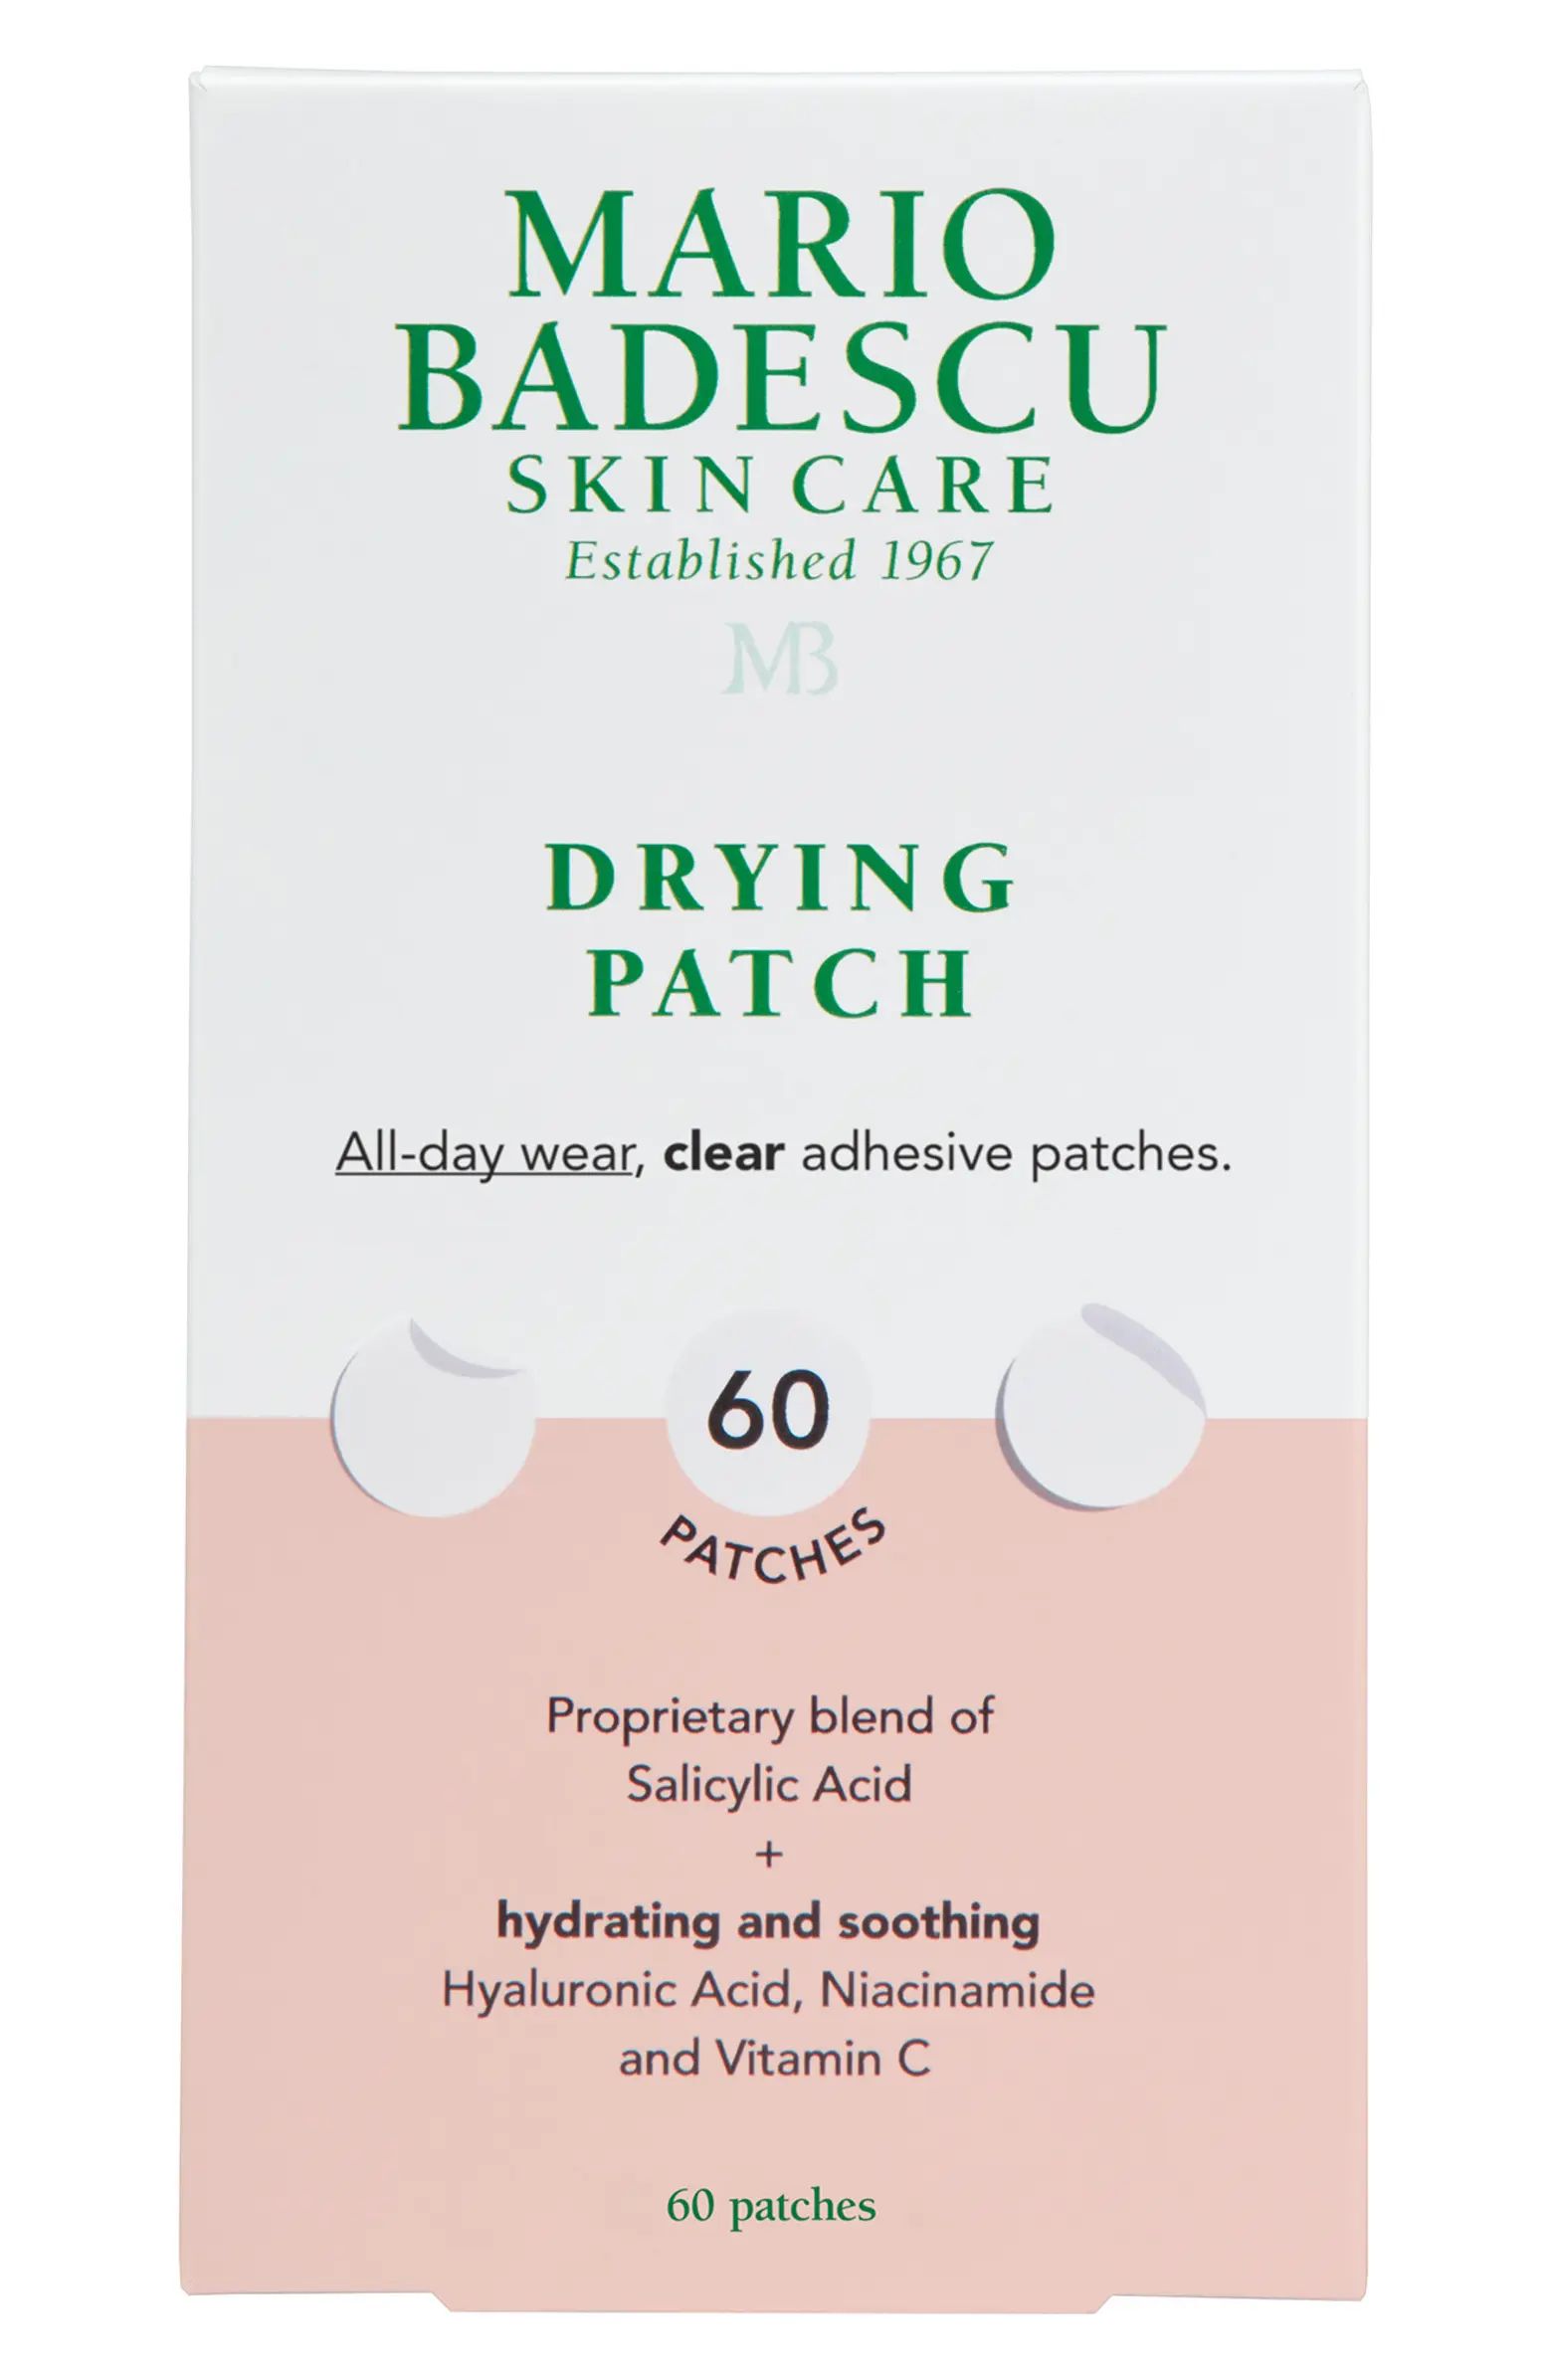 Drying Patches | Nordstrom